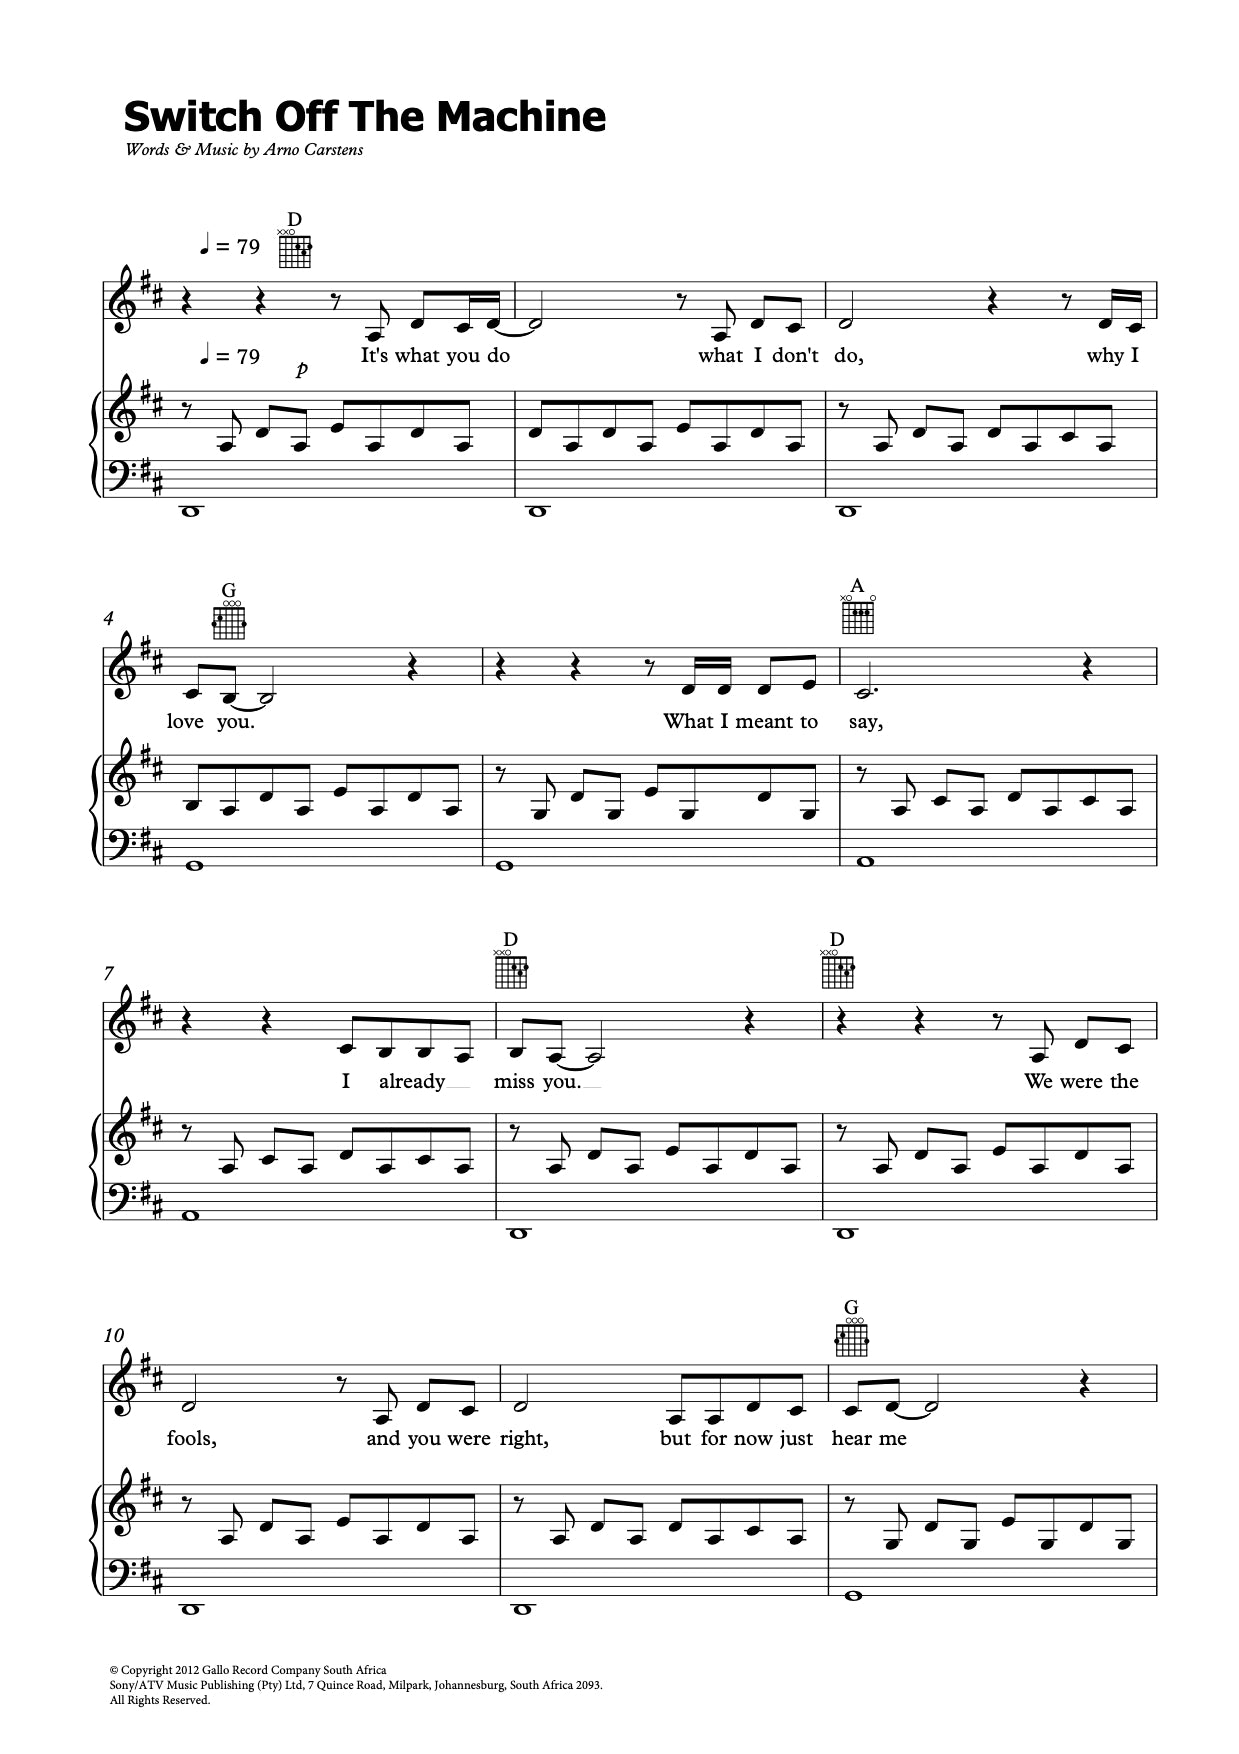 Arno Carstens - Switch Off the Machine  Sheet Music